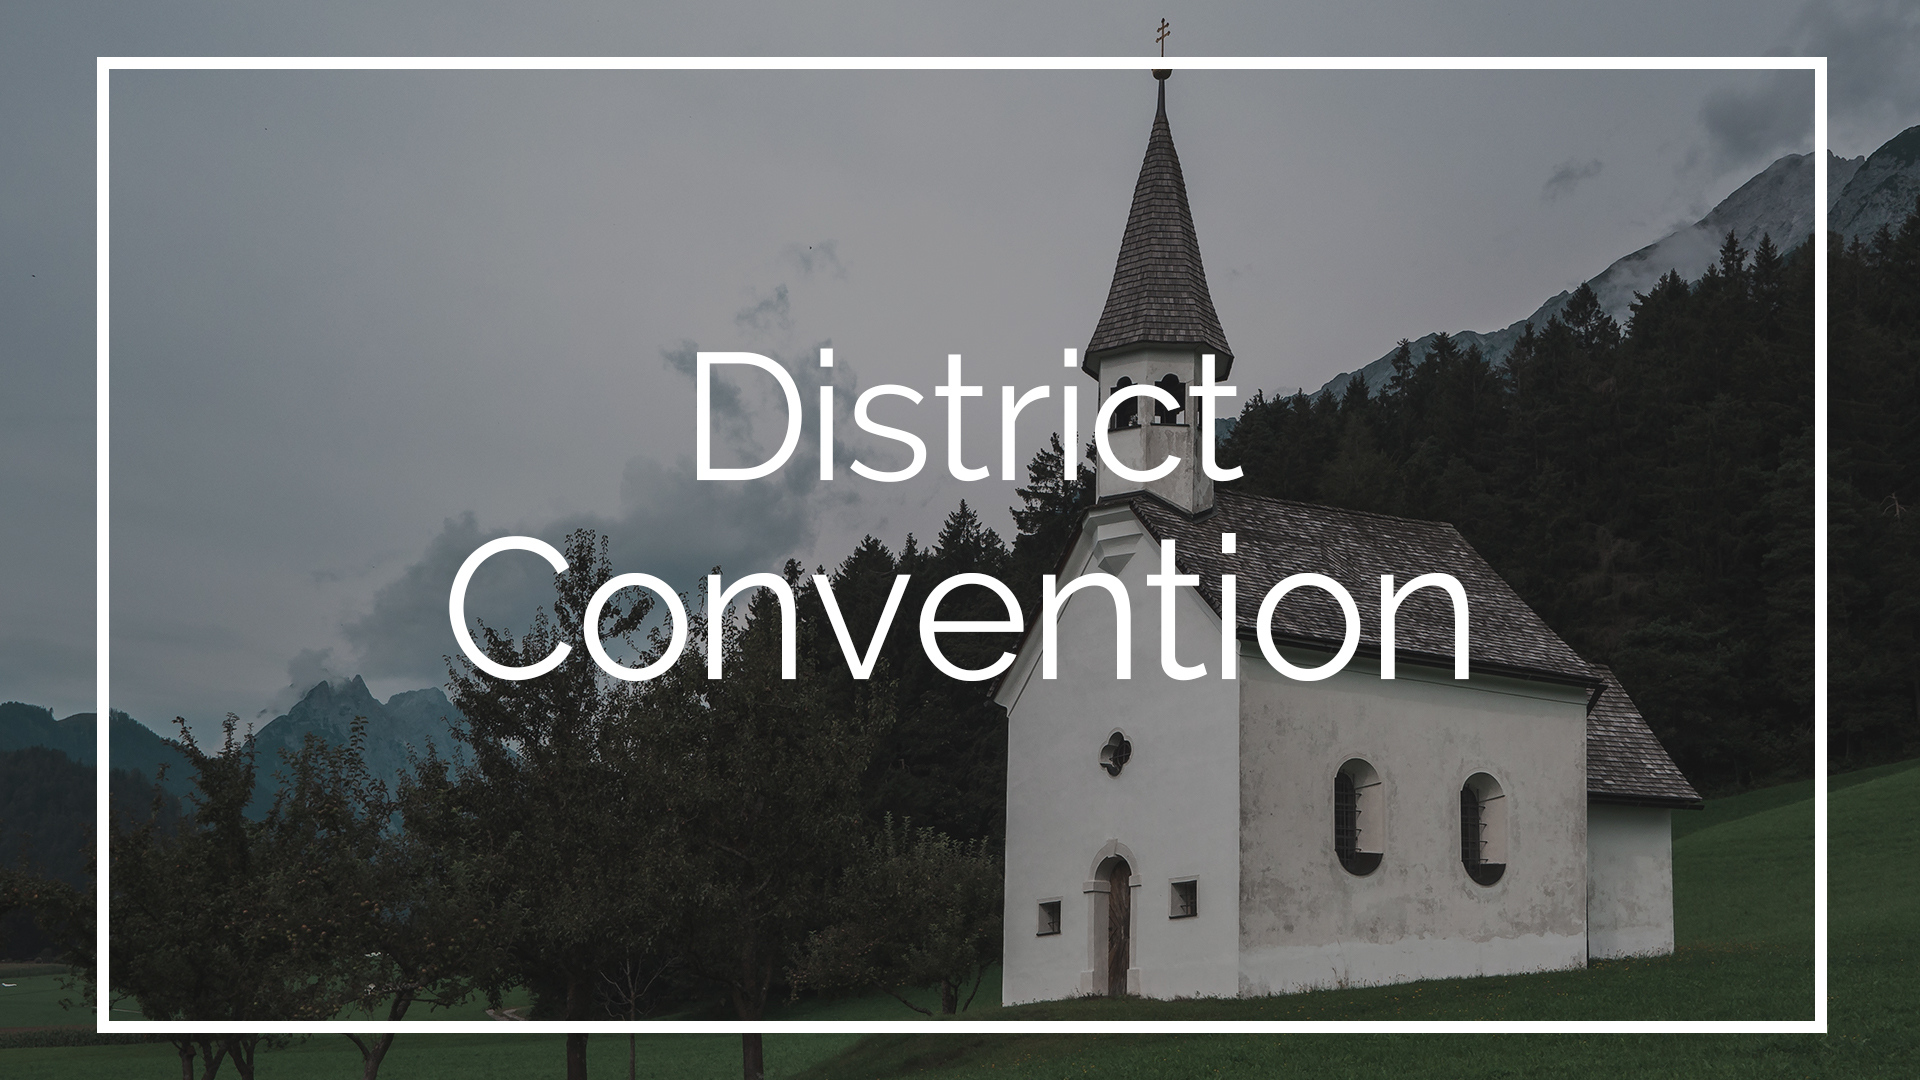 District Convention